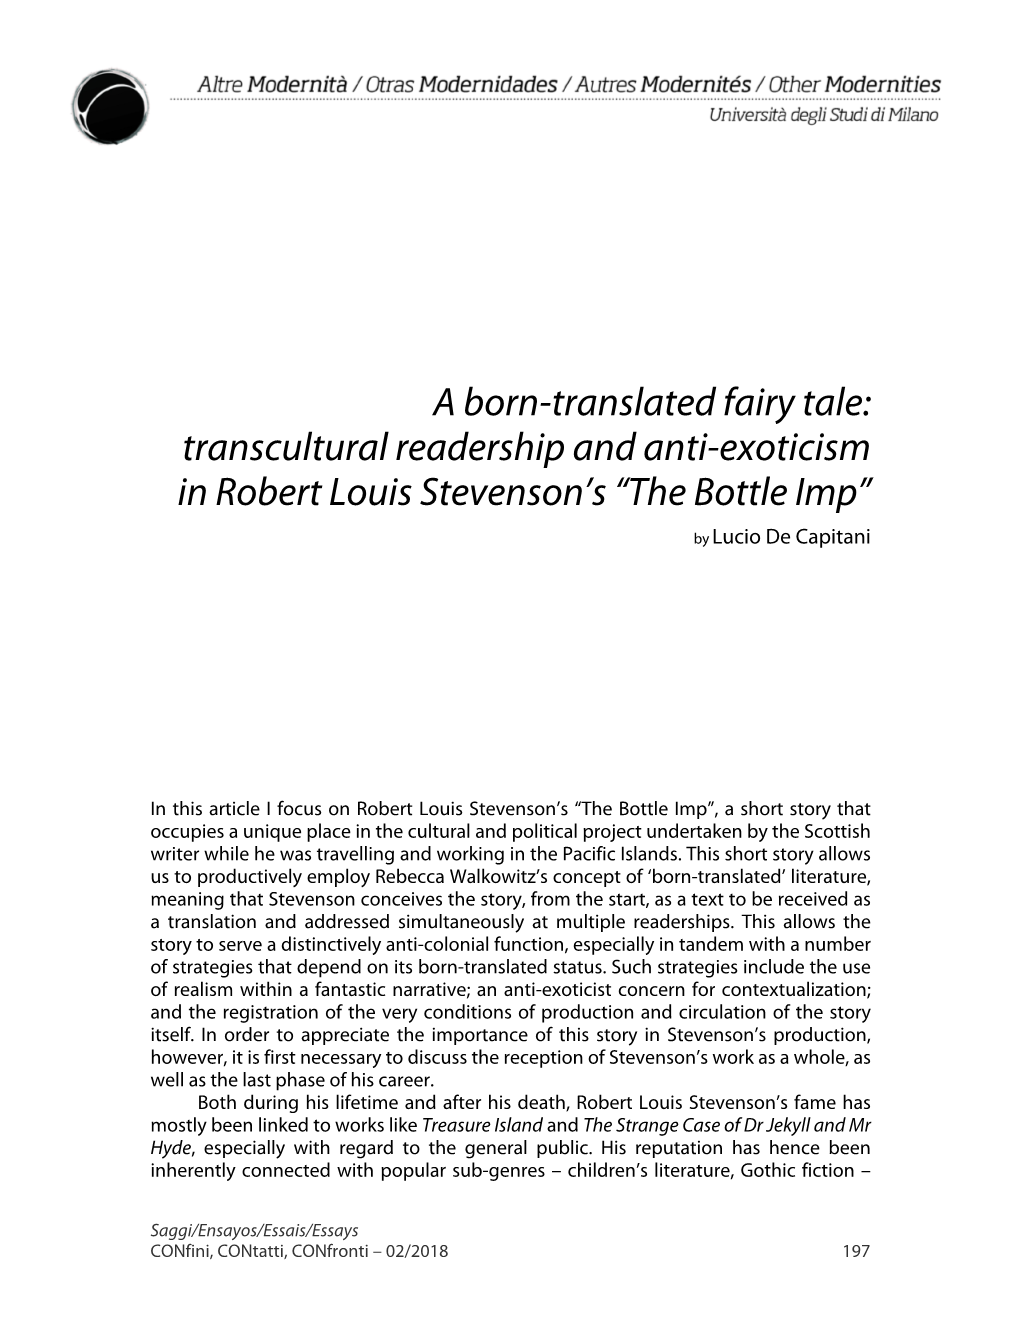 A Born-Translated Fairy Tale: Transcultural Readership and Anti-Exoticism in Robert Louis Stevenson's “The Bottle Imp”